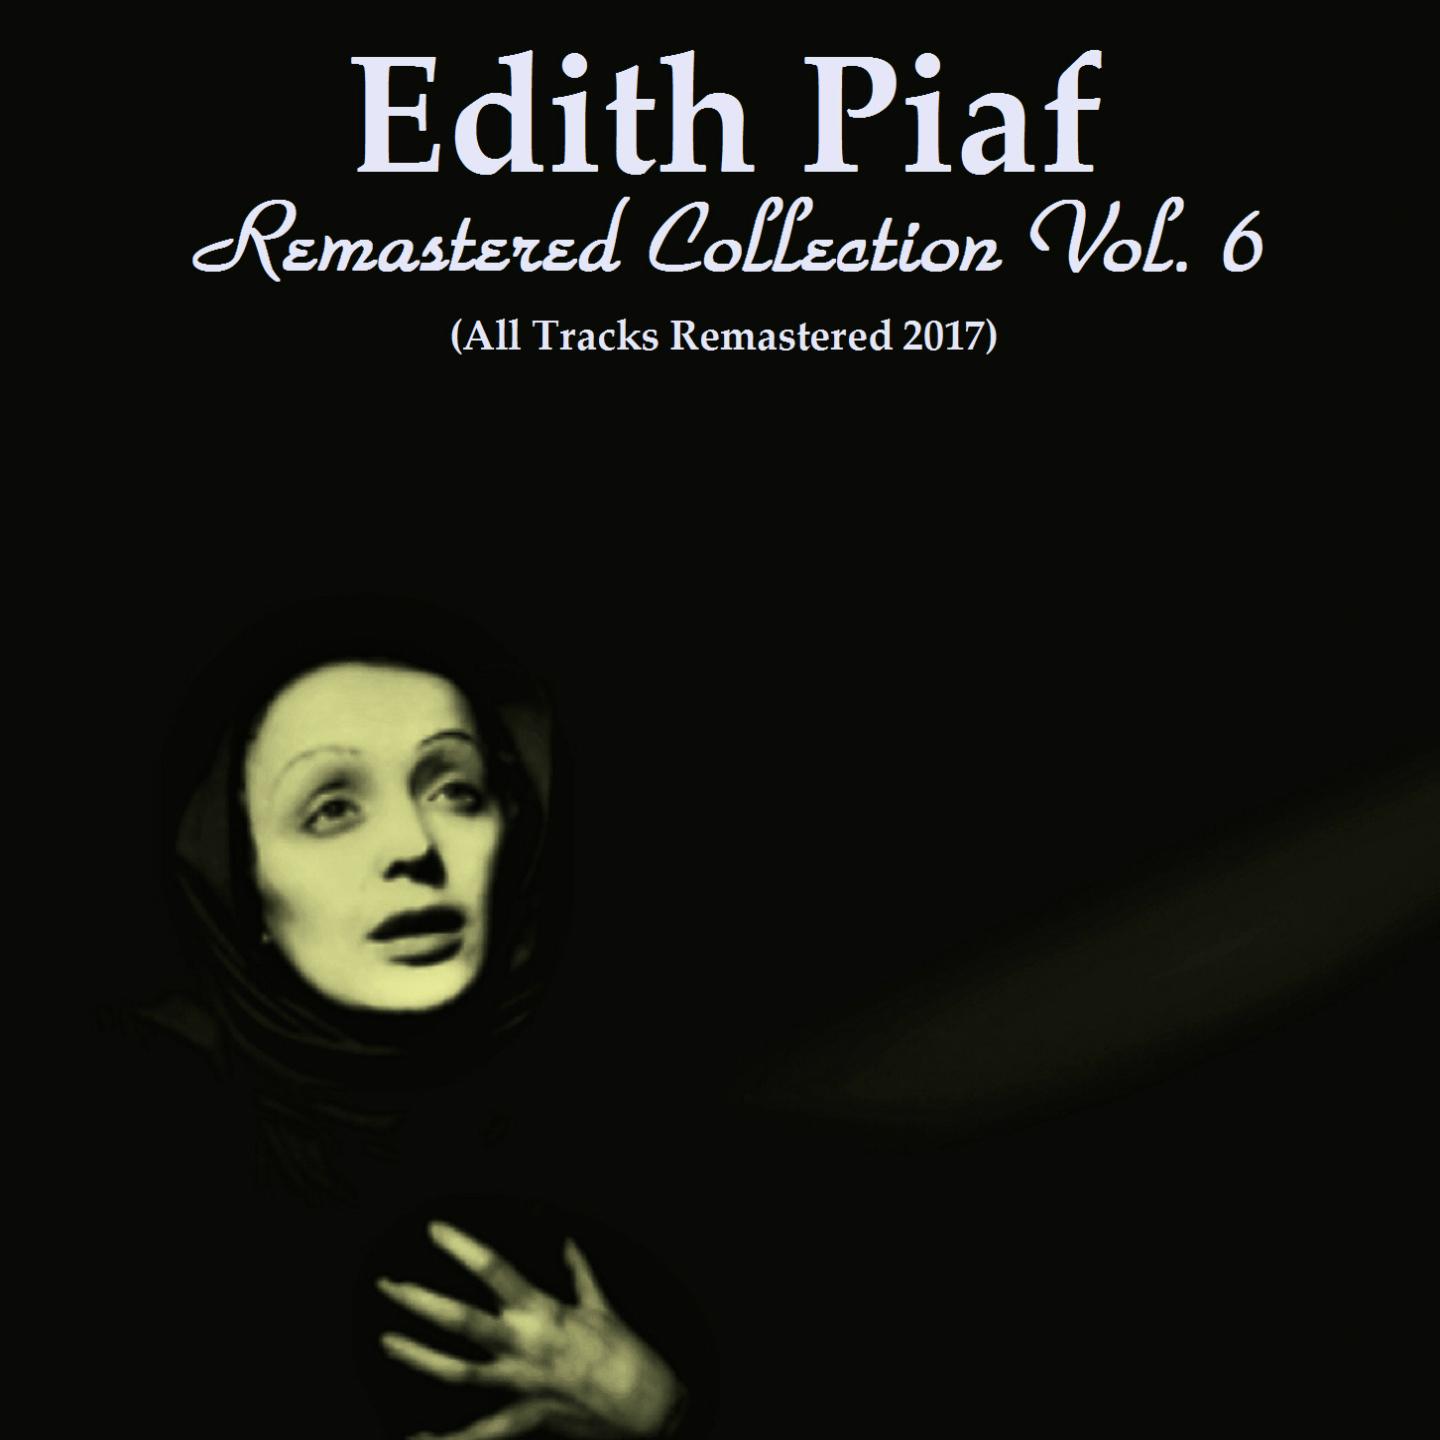 Remastered collection vol. 6